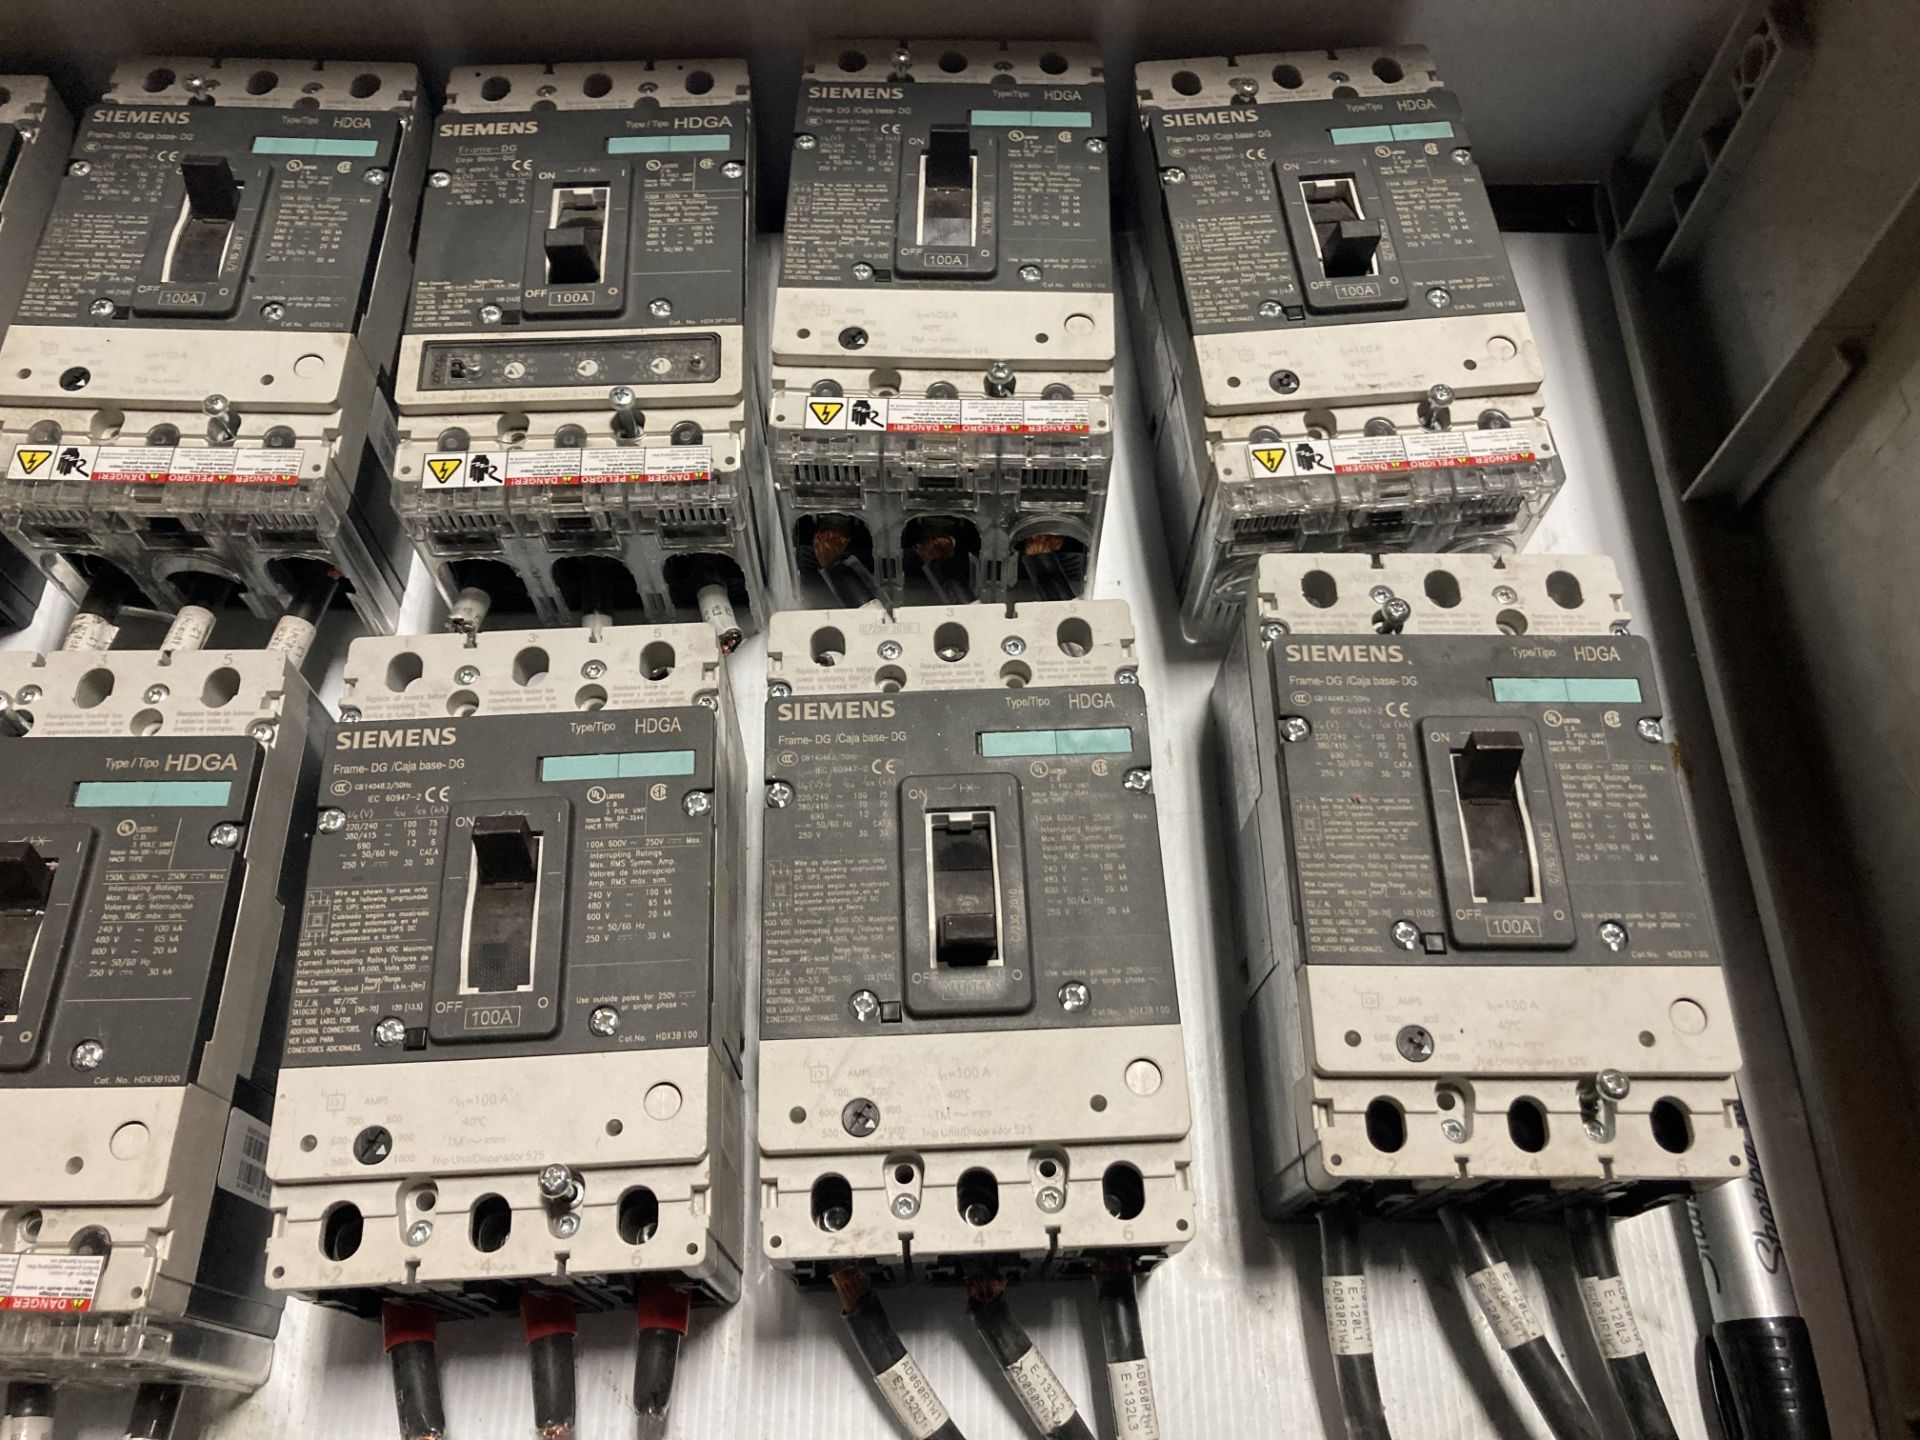 Lot of (14) Siemens 100A Circuit Breakers, Type: HDGA - Image 3 of 5